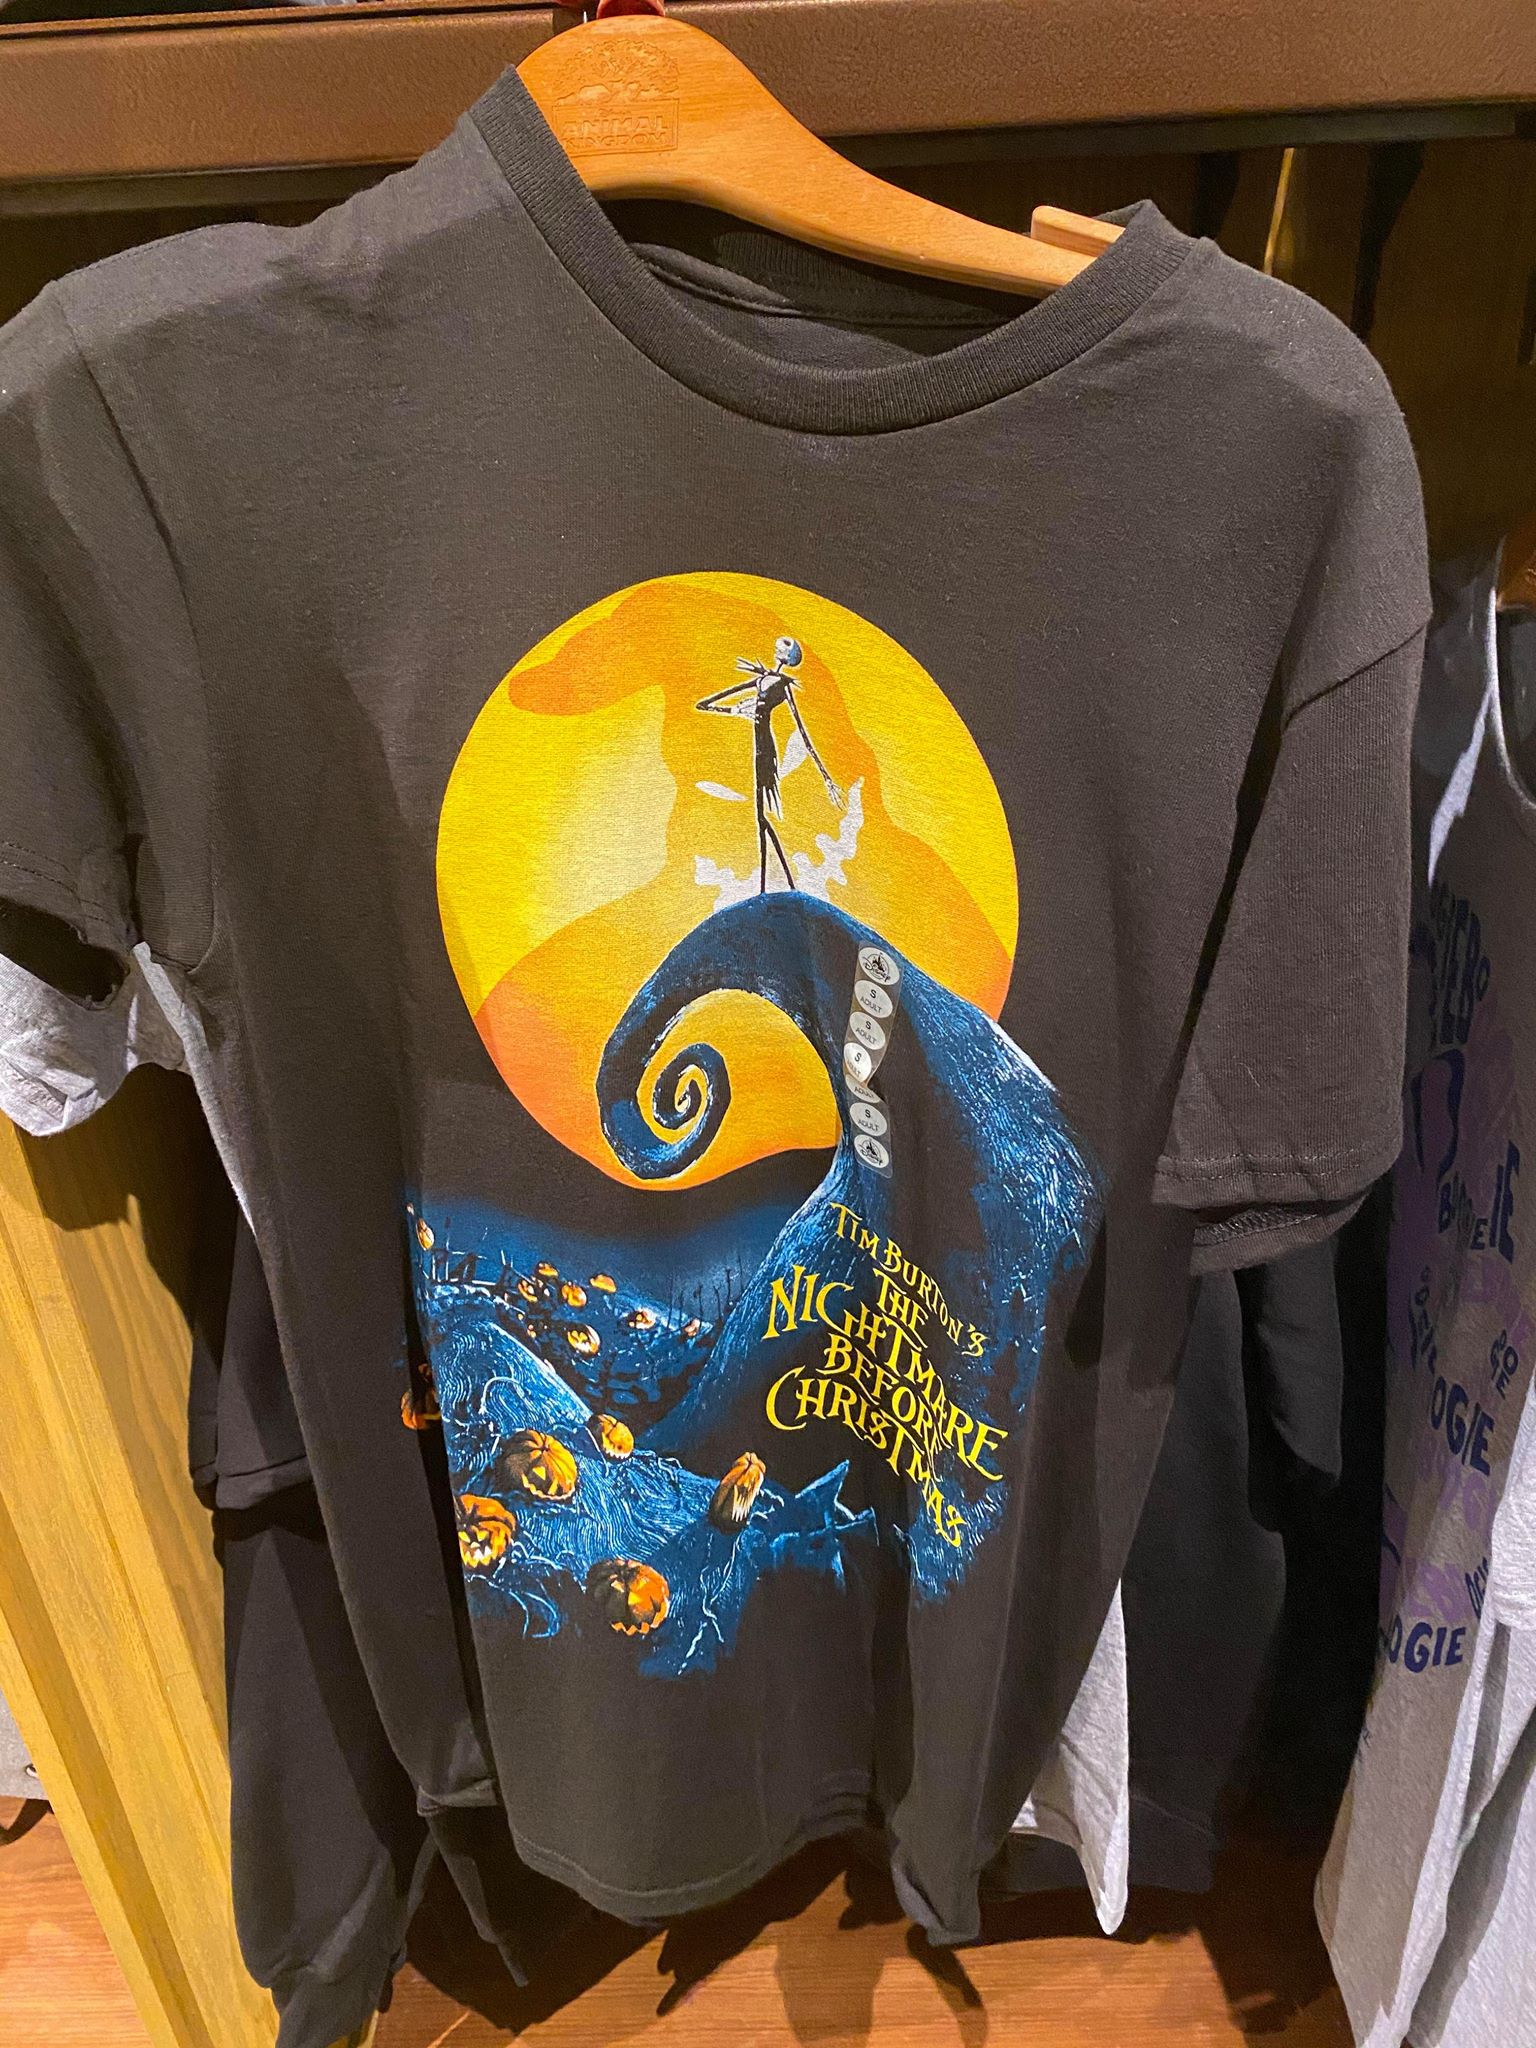 The Nightmare Before Christmas Merchandise is NOW at Animal Kingdom